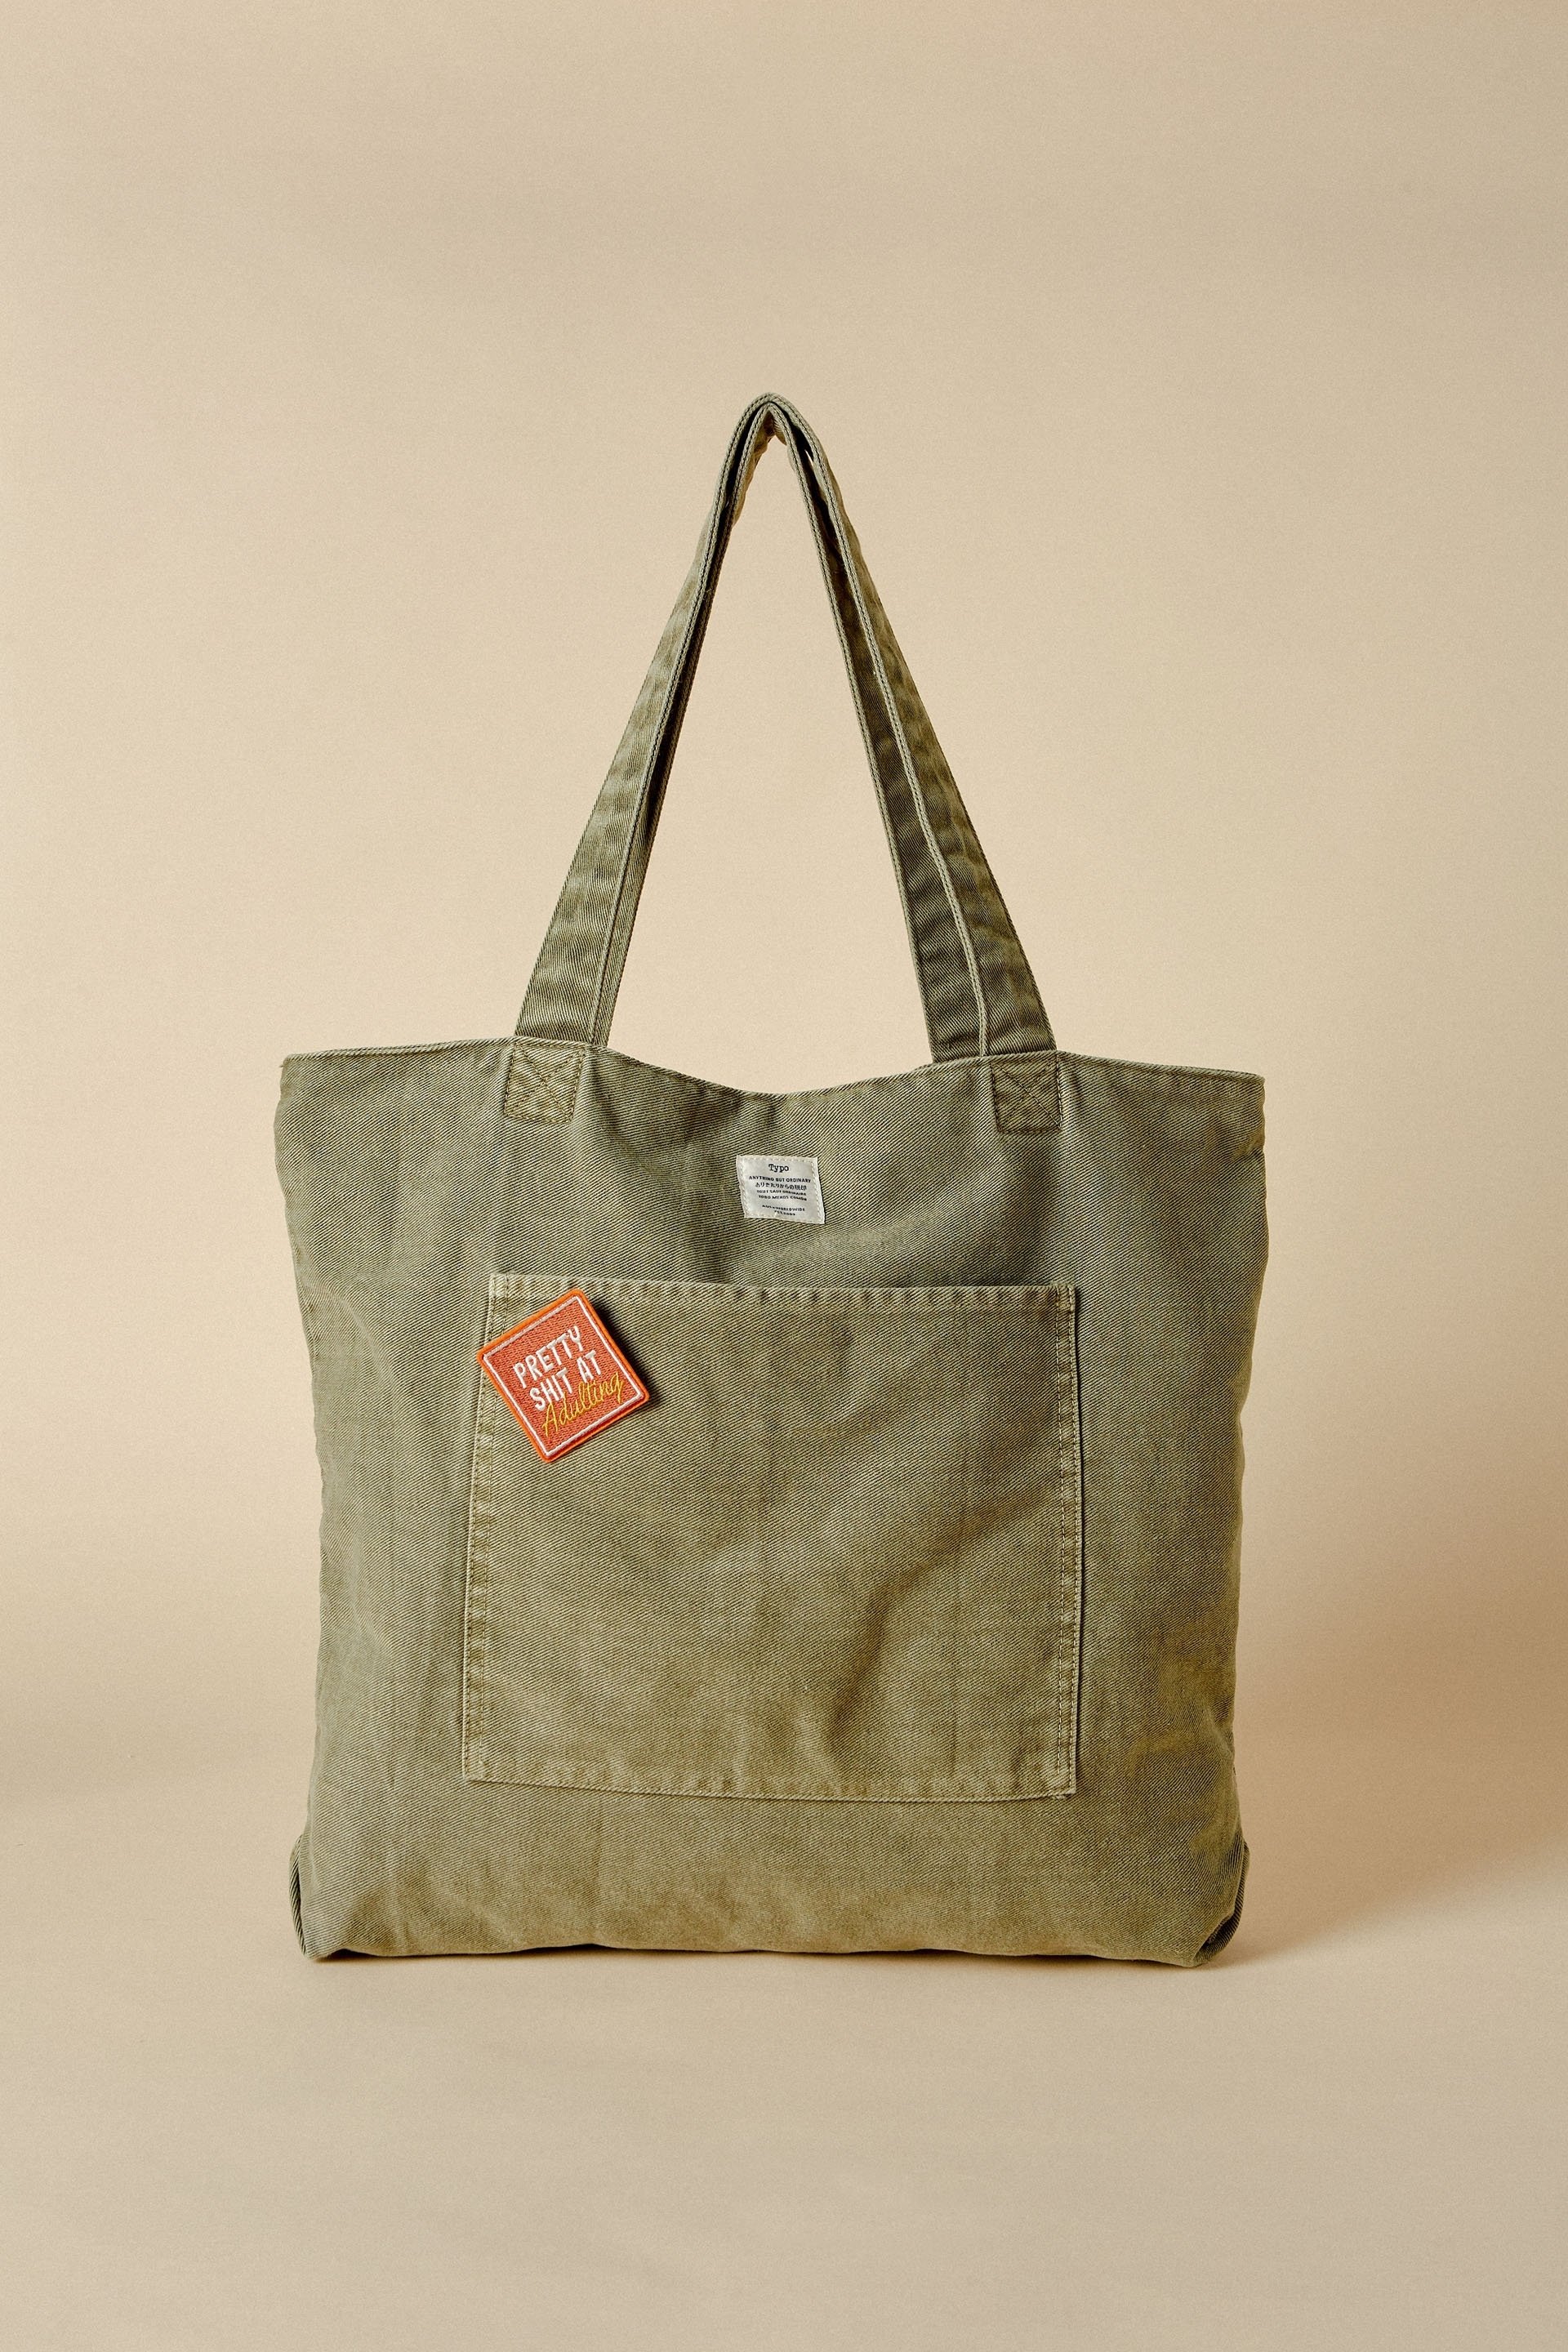 Tote Bags: Where to Find Functional But Cute Canvas Tote Bags Australia